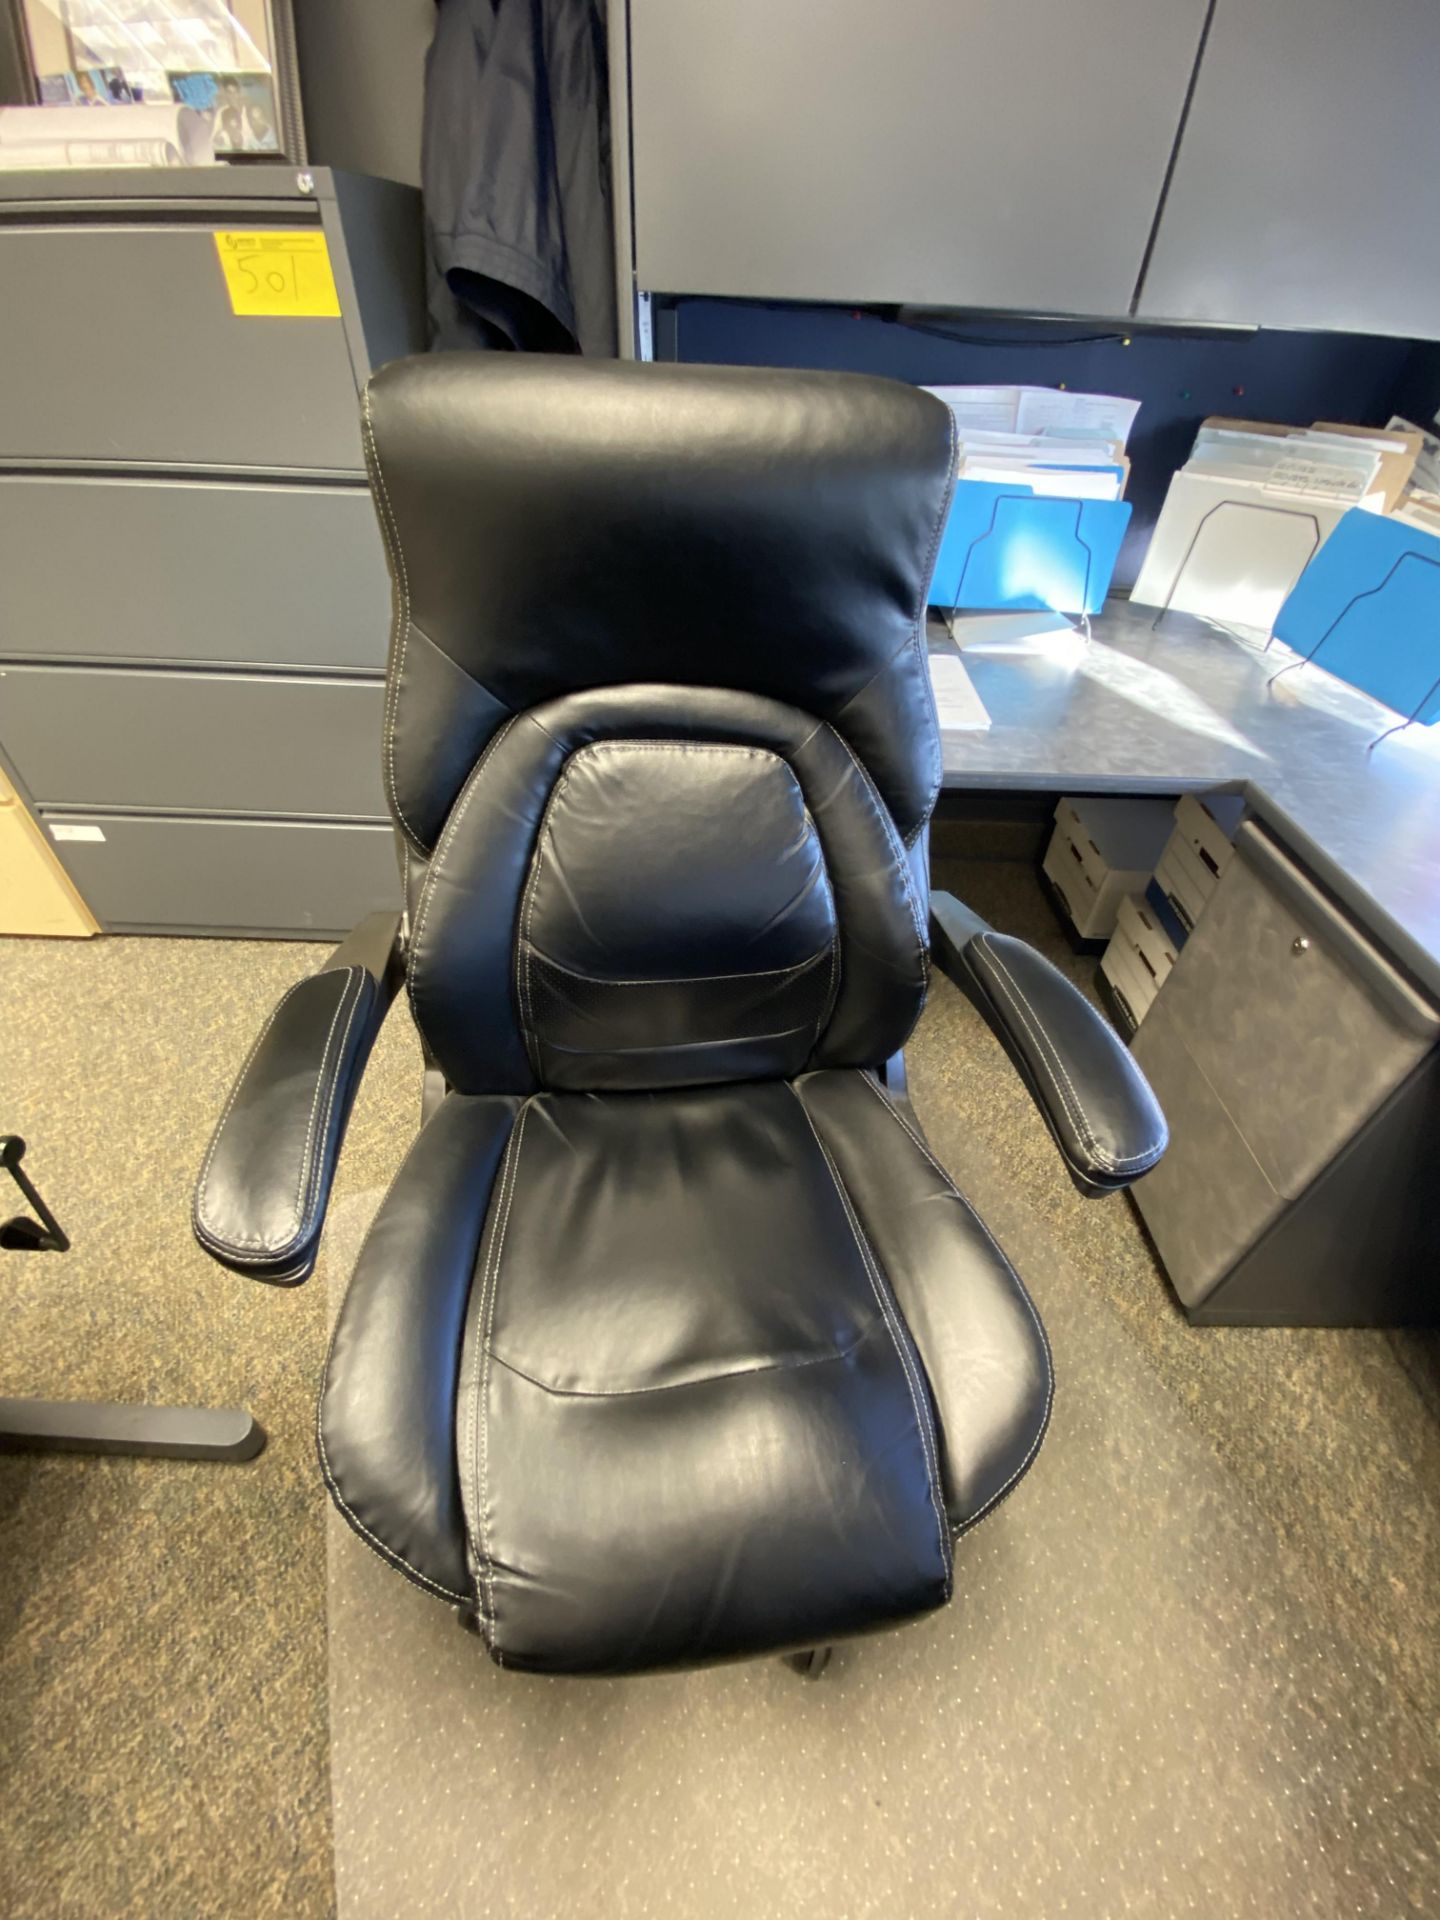 LAZYBOY HIGH BACK SWIVEL CHAIR (NOTE: SUBJECT TO LATE REMOVAL, PICKUP ON FRIDAY APRIL 26TH)